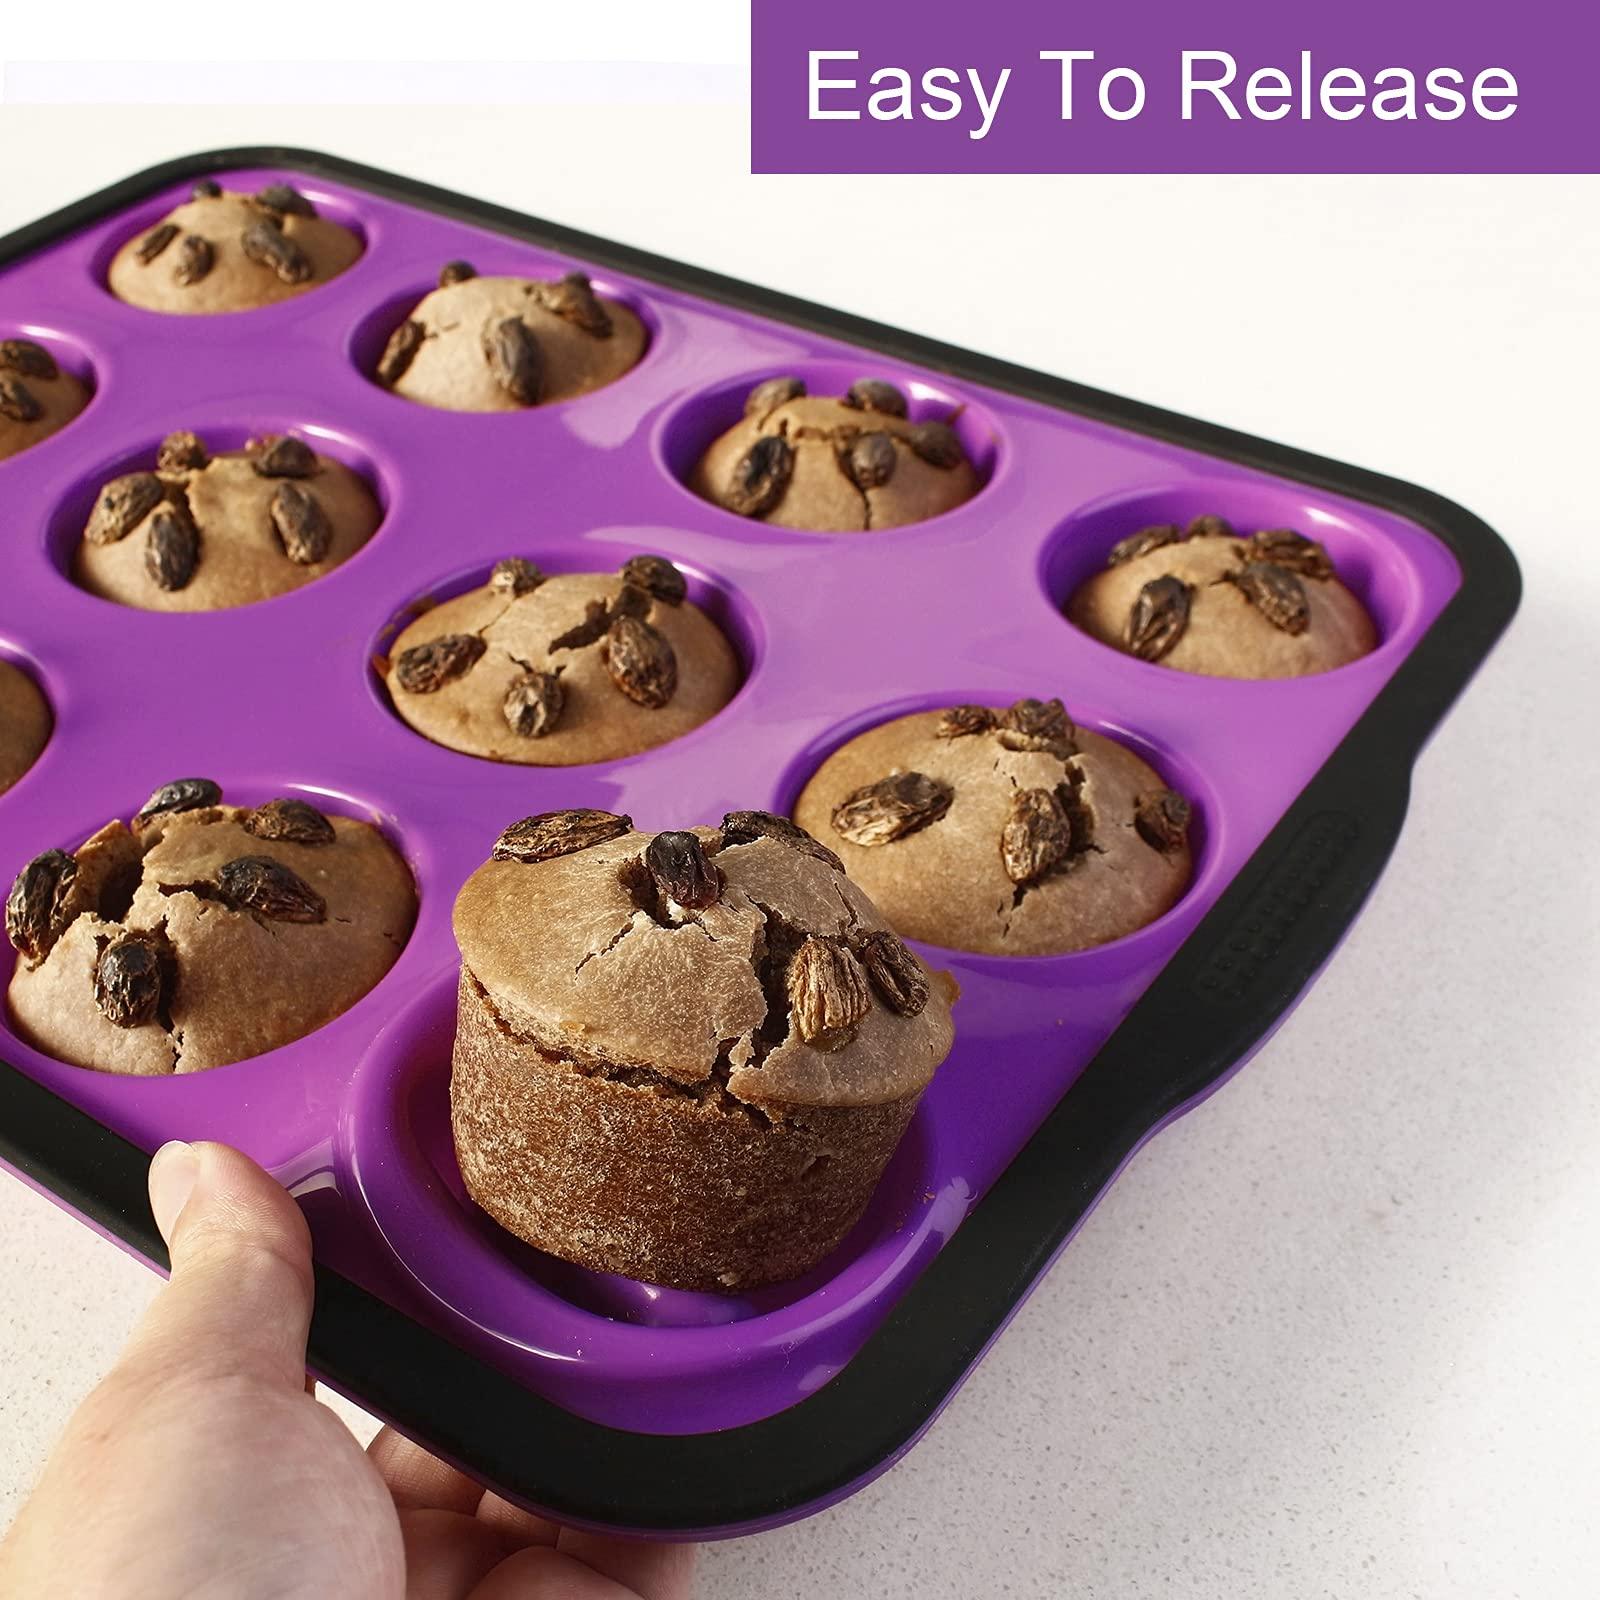 Aichoof Non-Stick Silicone Muffin Pan With Reinforced Stainless Steel Frame Inside,12 Cup Regular Muffin Baking Mold, 12 Cup Muffin Tin, BPA Free,Dishwasher Safe, Purple - CookCave